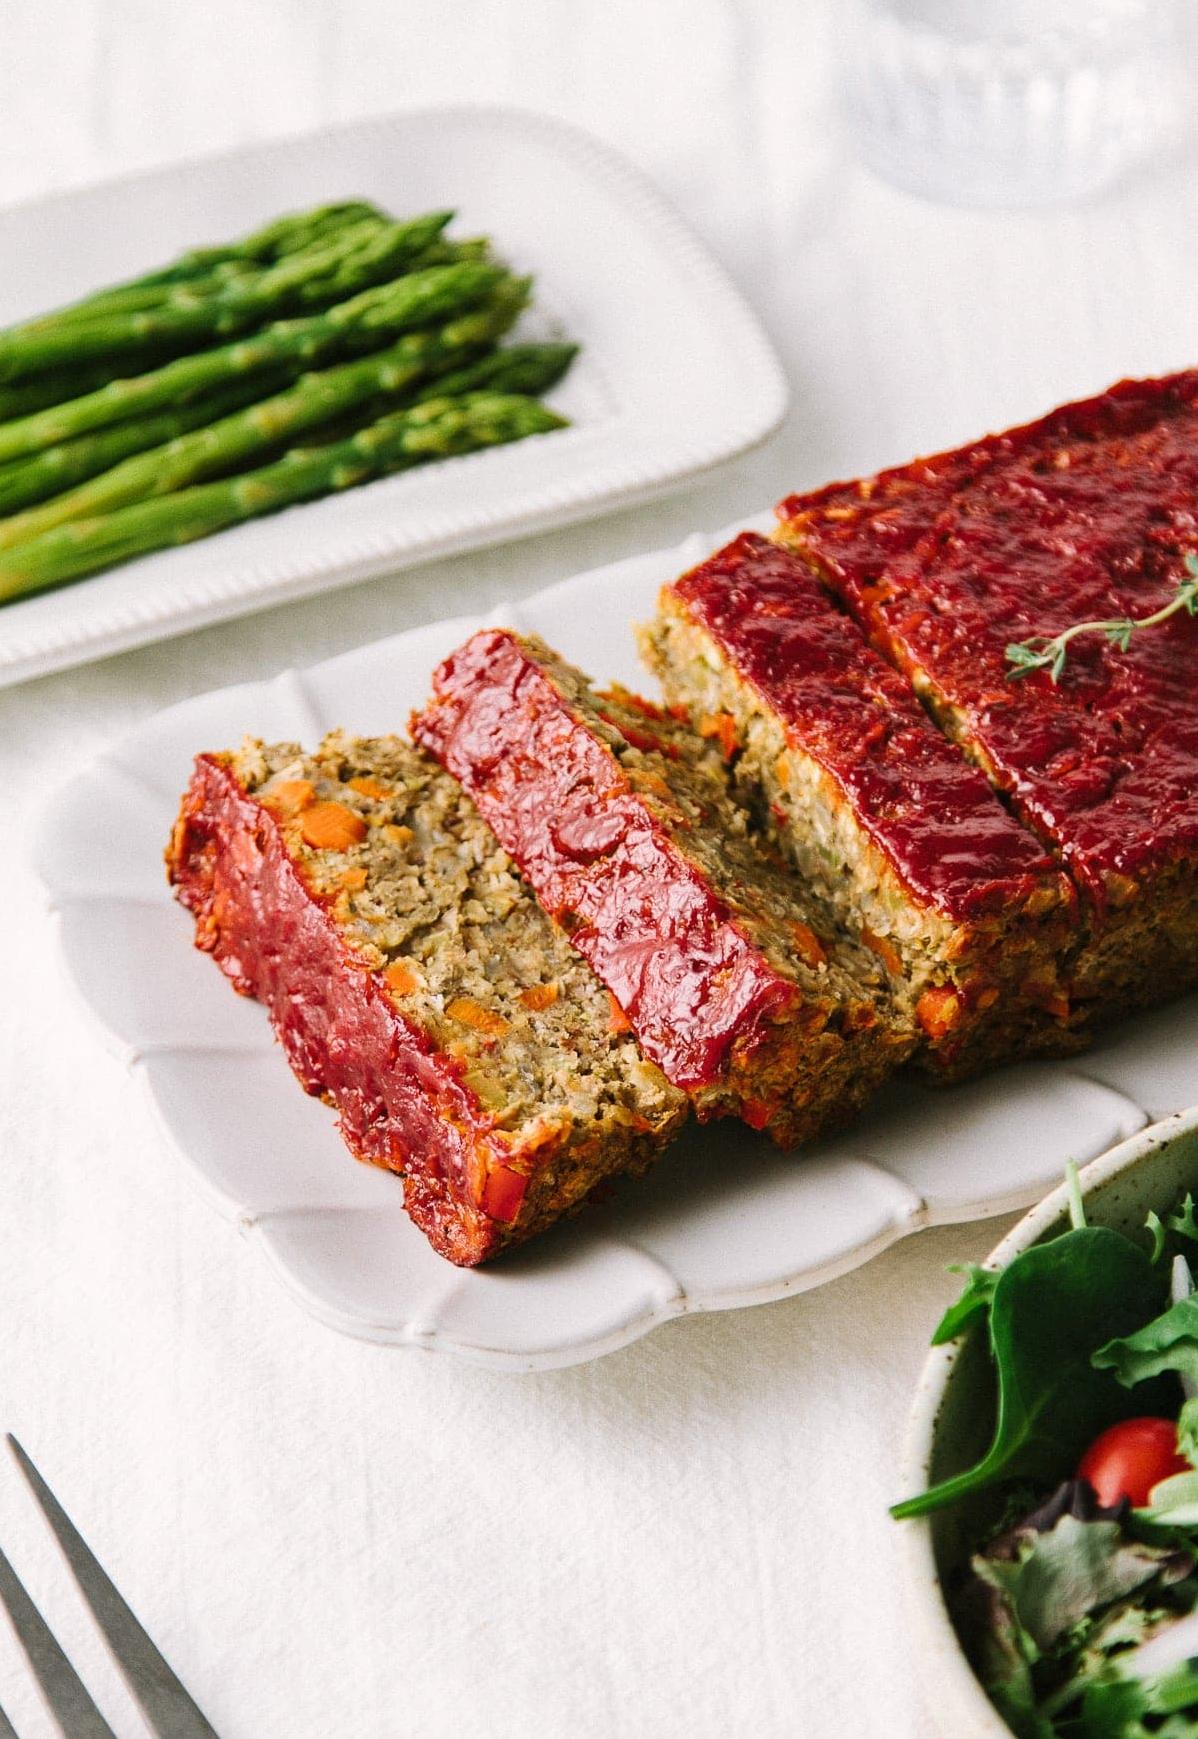  No meat? No problem! This lentil loaf is just as satisfying and tasty!